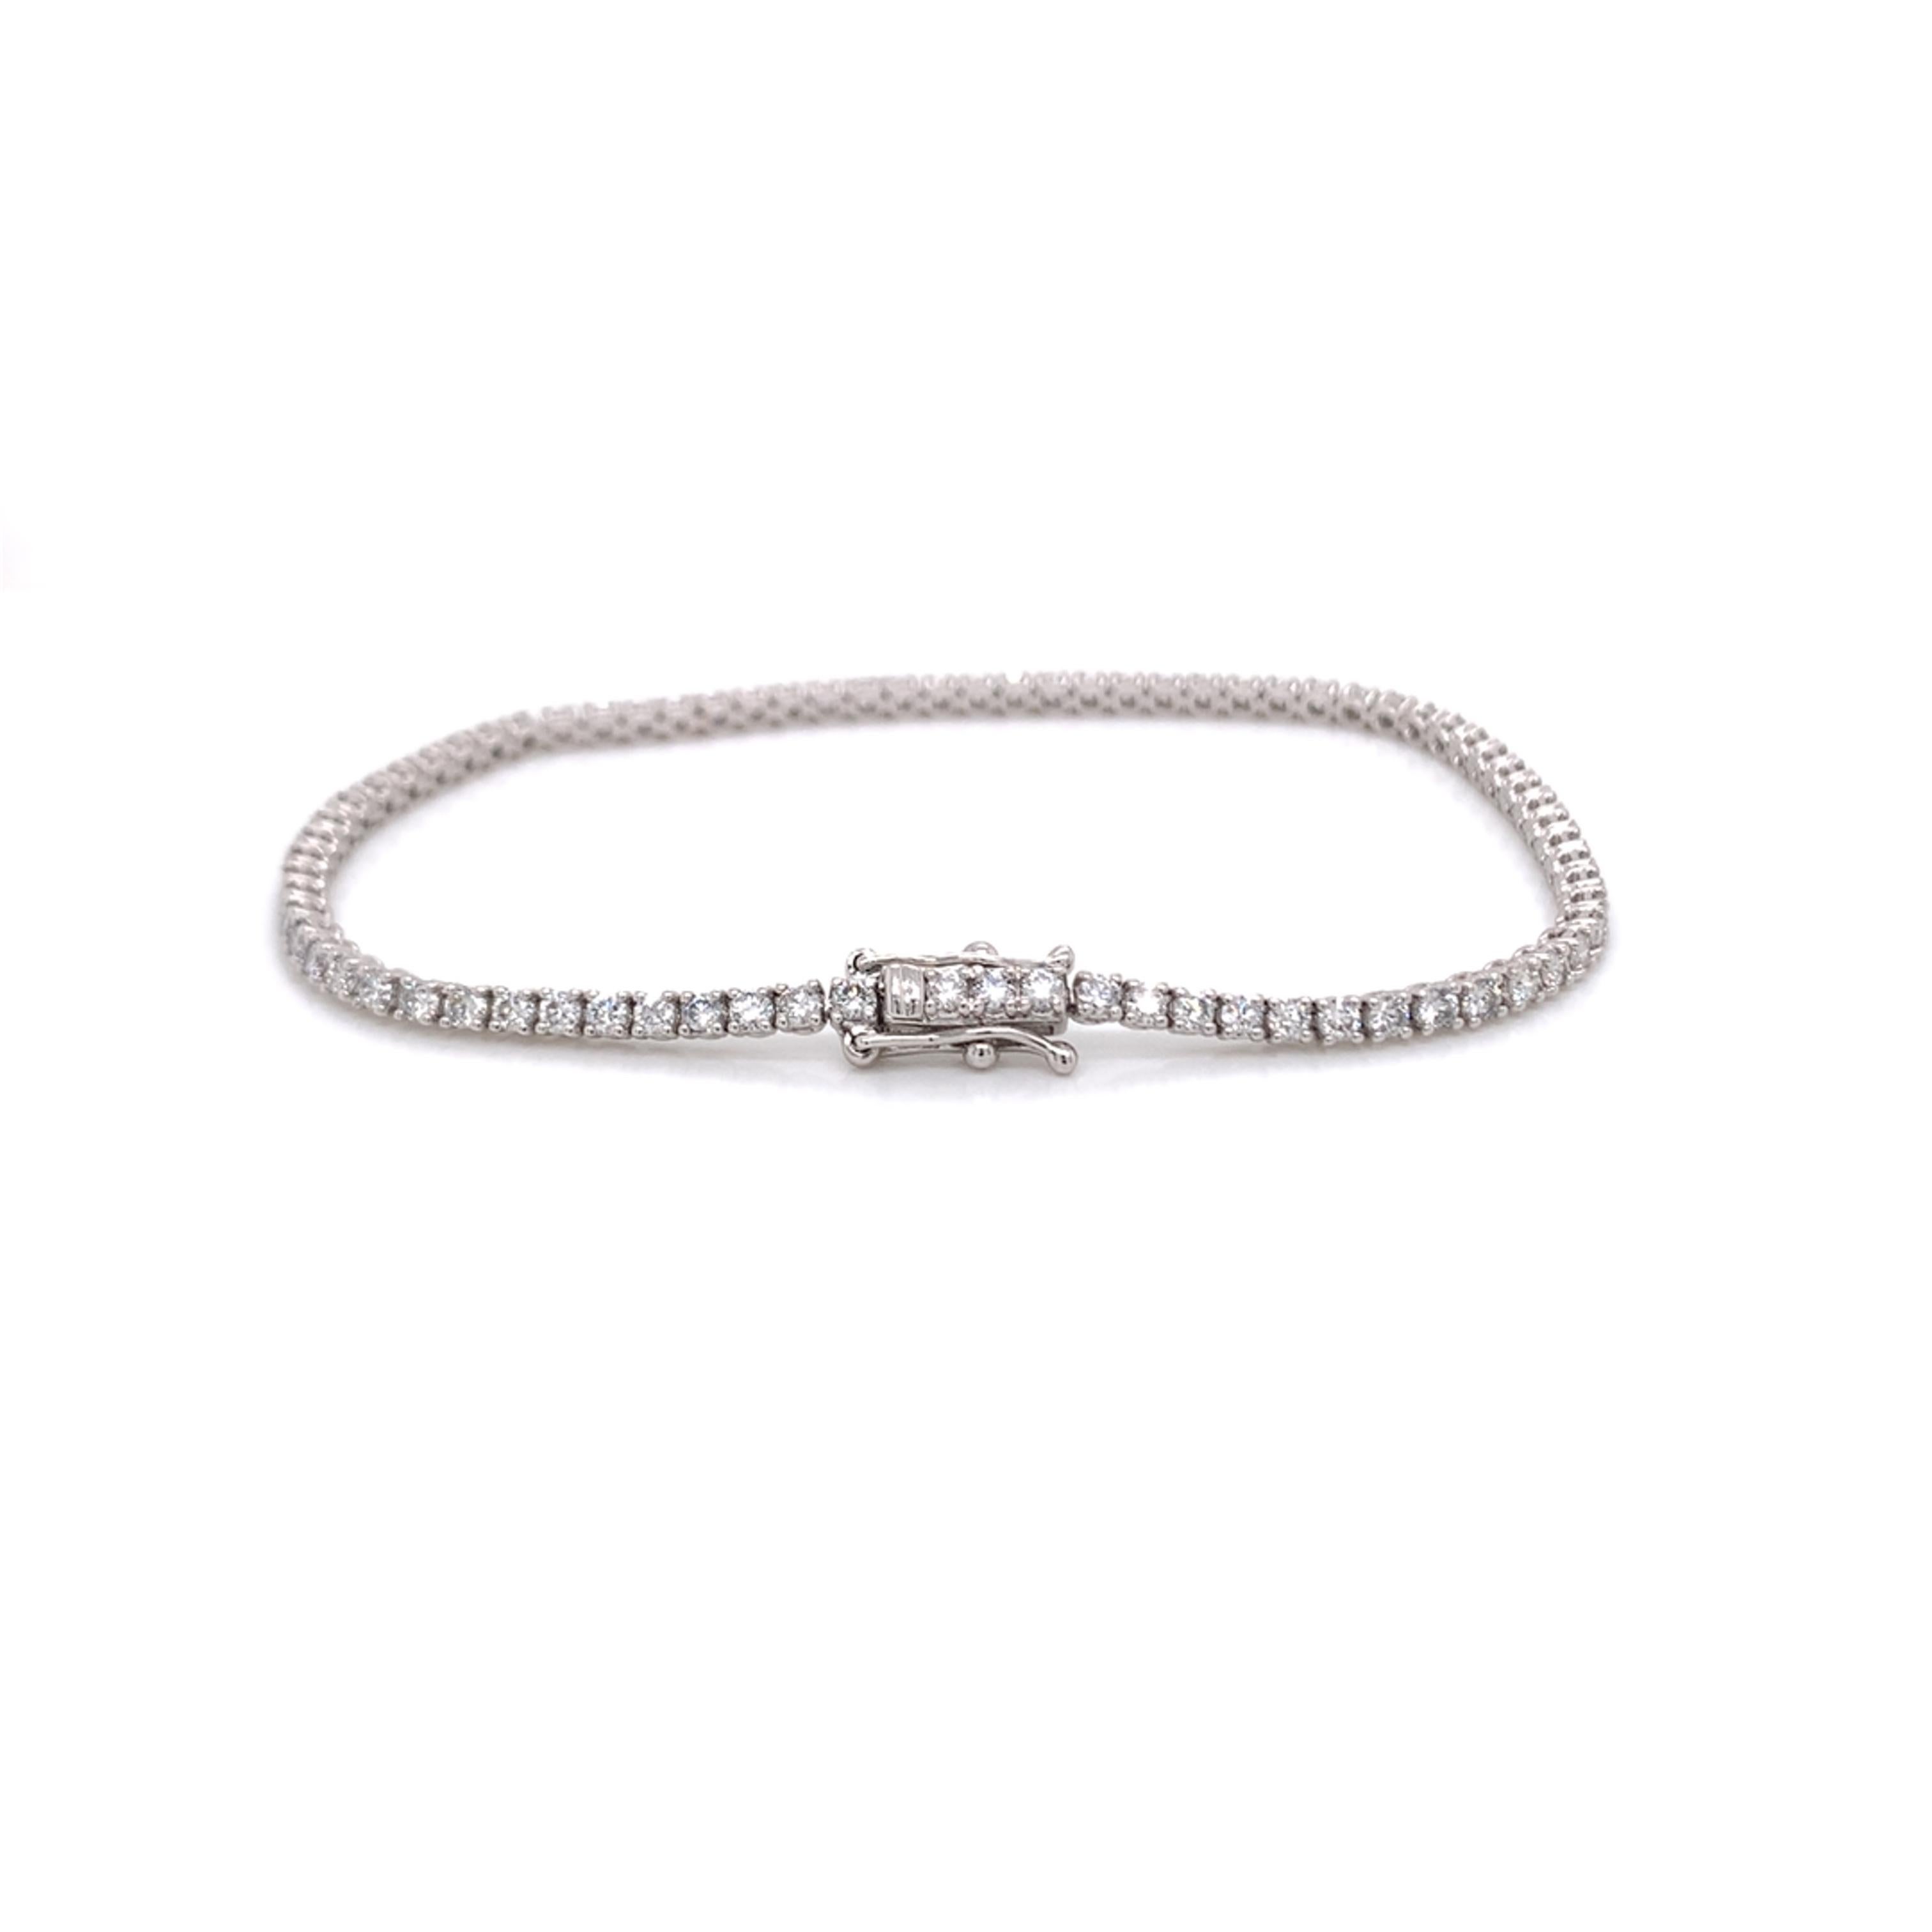 Thin/Small Diamond tennis bracelet made with real/natural brilliant cut diamonds. Total Diamond Weight: 2.39 carats. Diamond Quantity: 78 round diamonds. Color: G. Clarity: VS. Mounted on 18kt white gold.